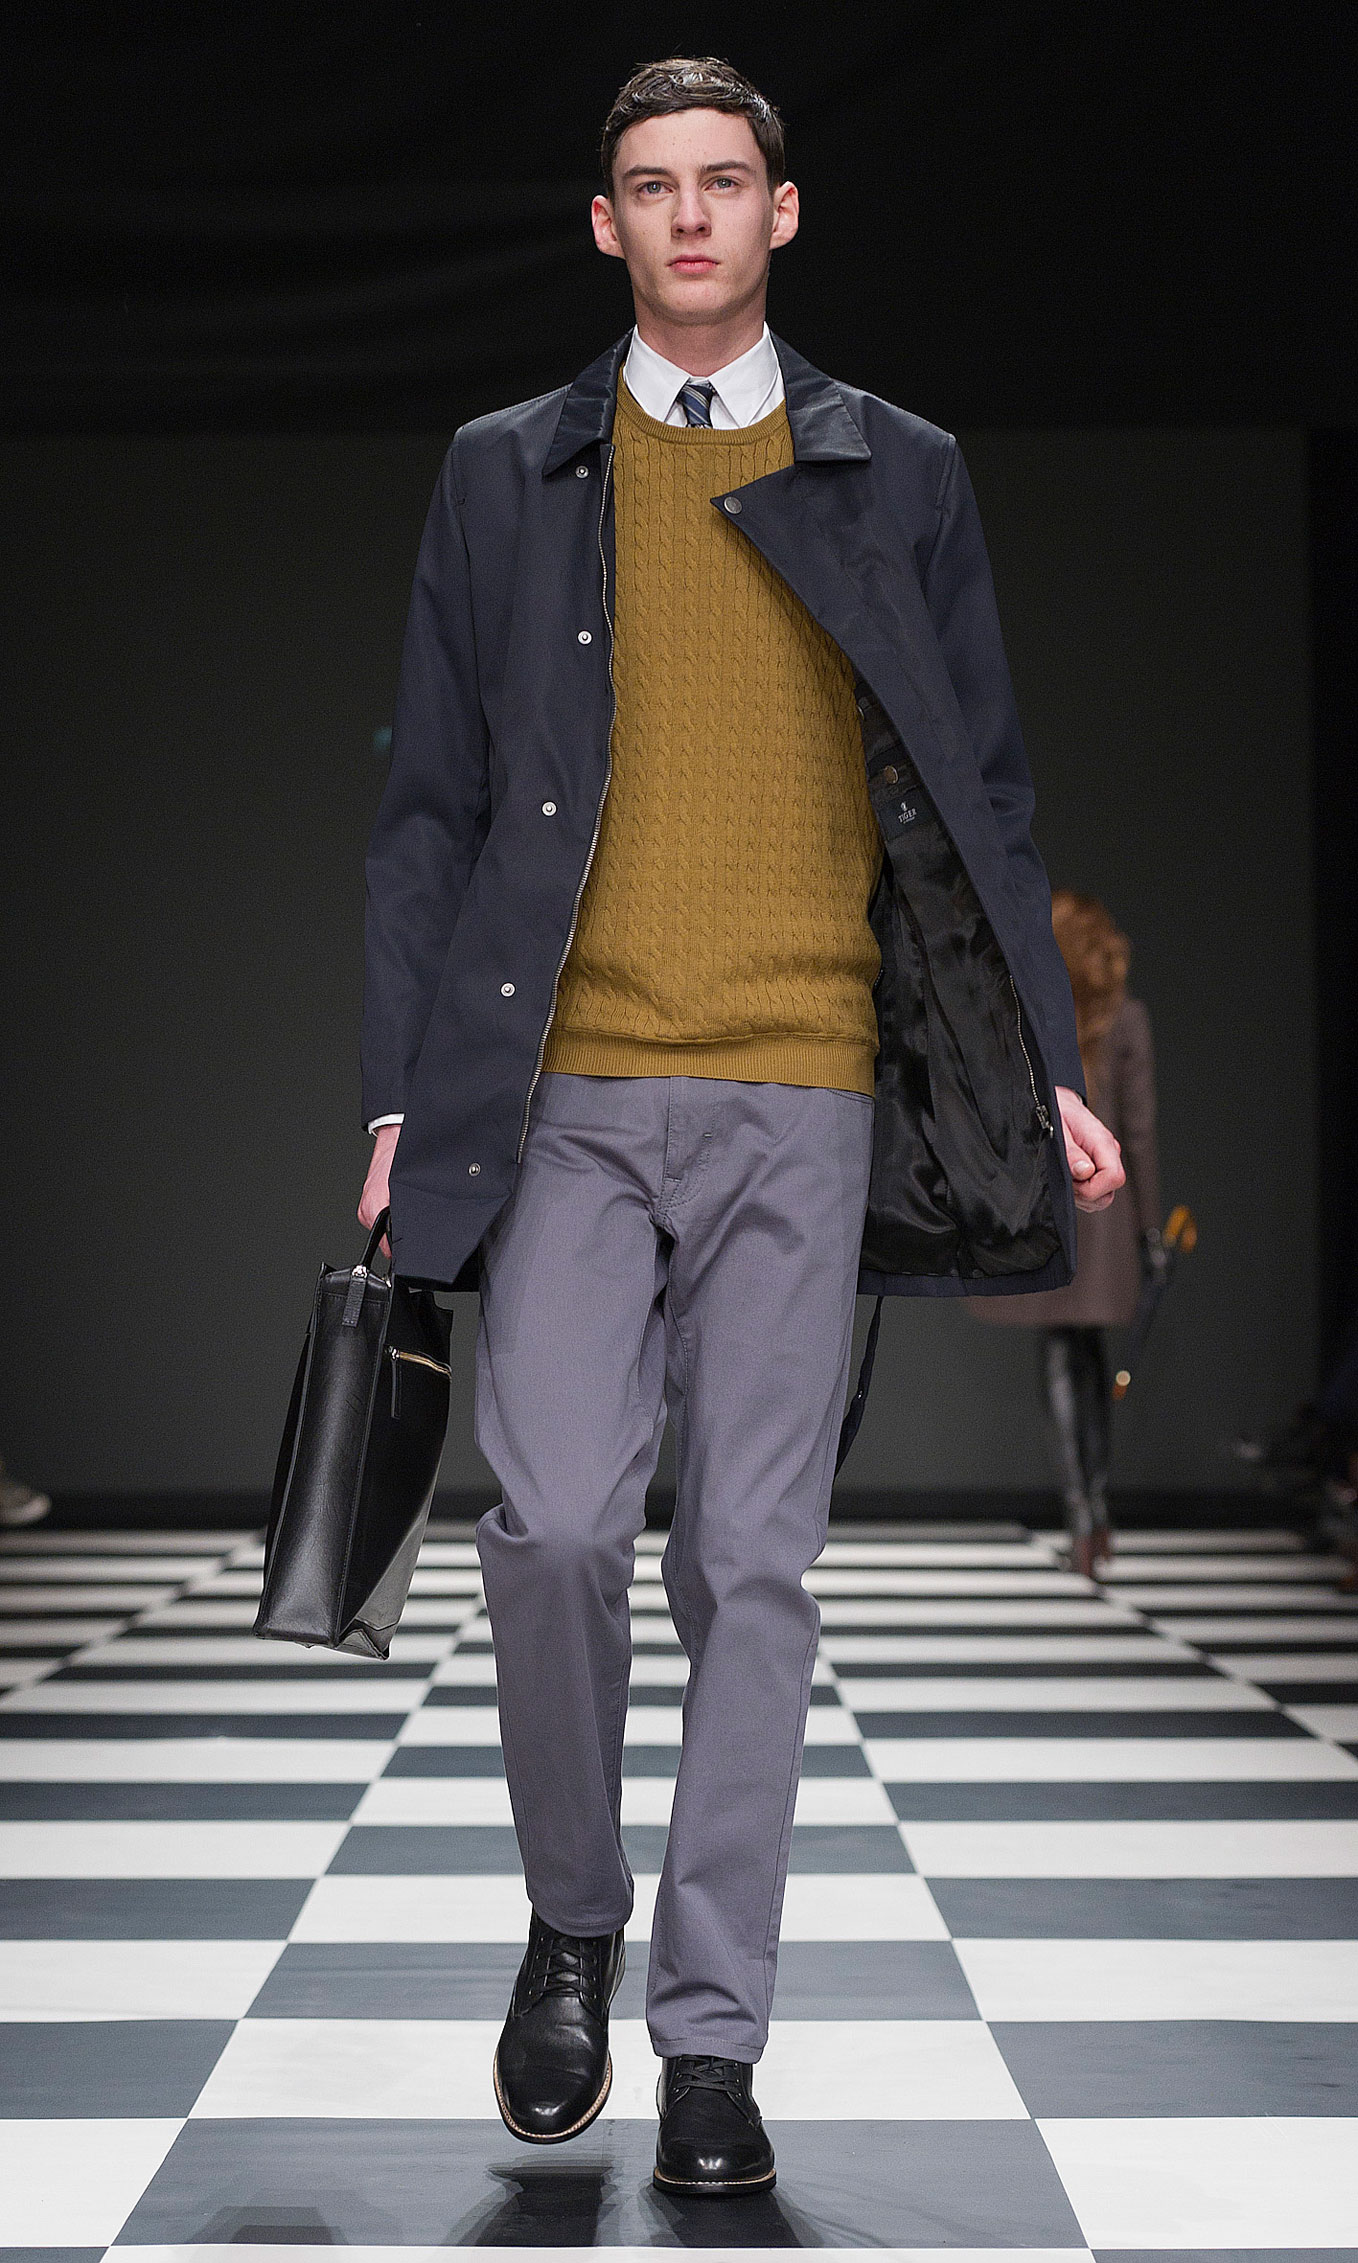 Tiger Of Sweden fall winter 2011/12 collection